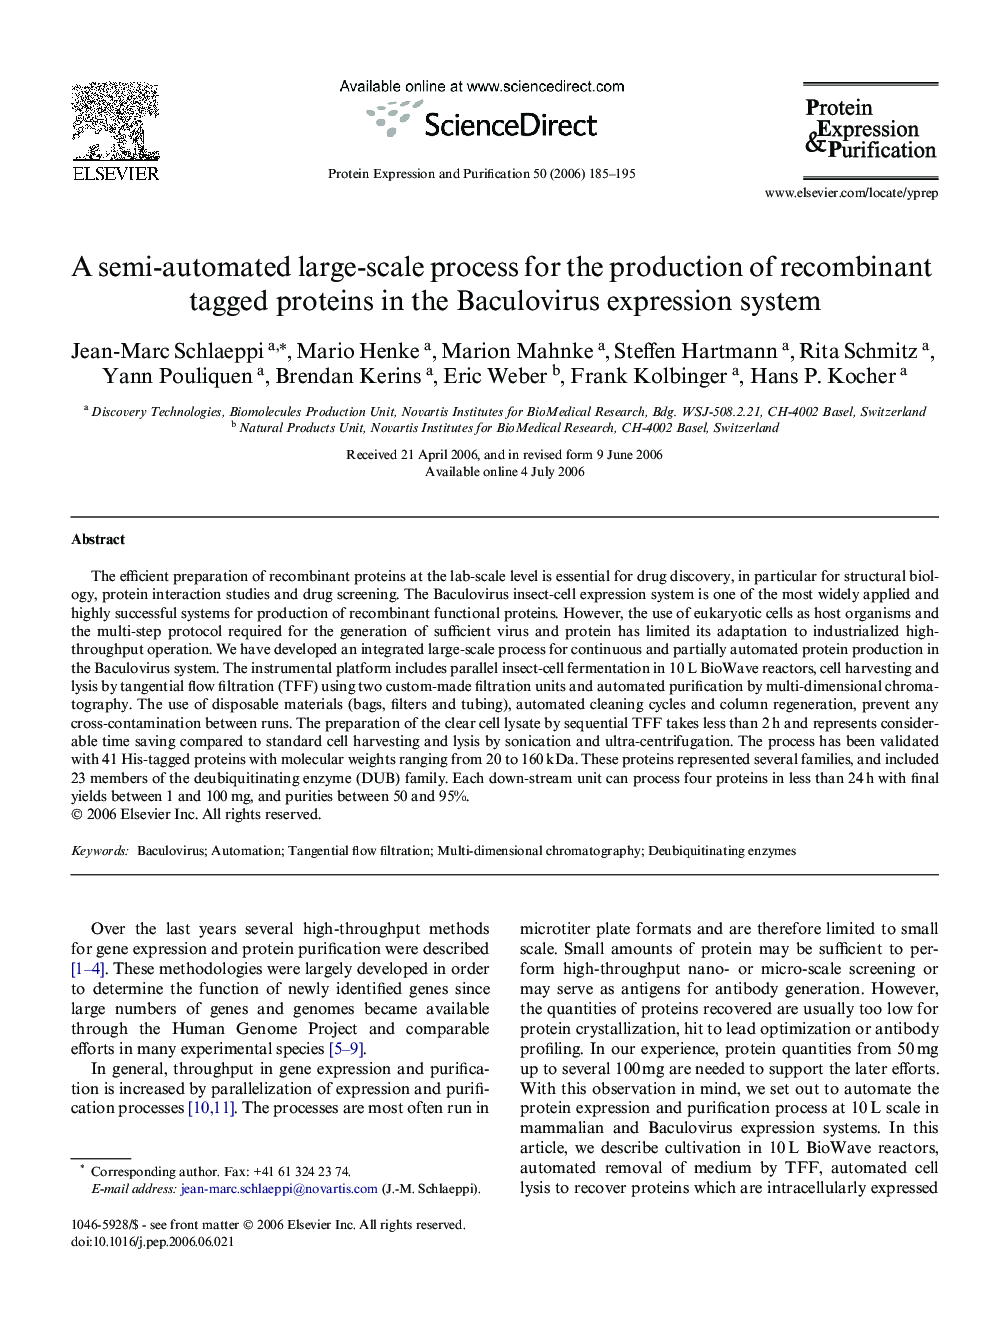 A semi-automated large-scale process for the production of recombinant tagged proteins in the Baculovirus expression system